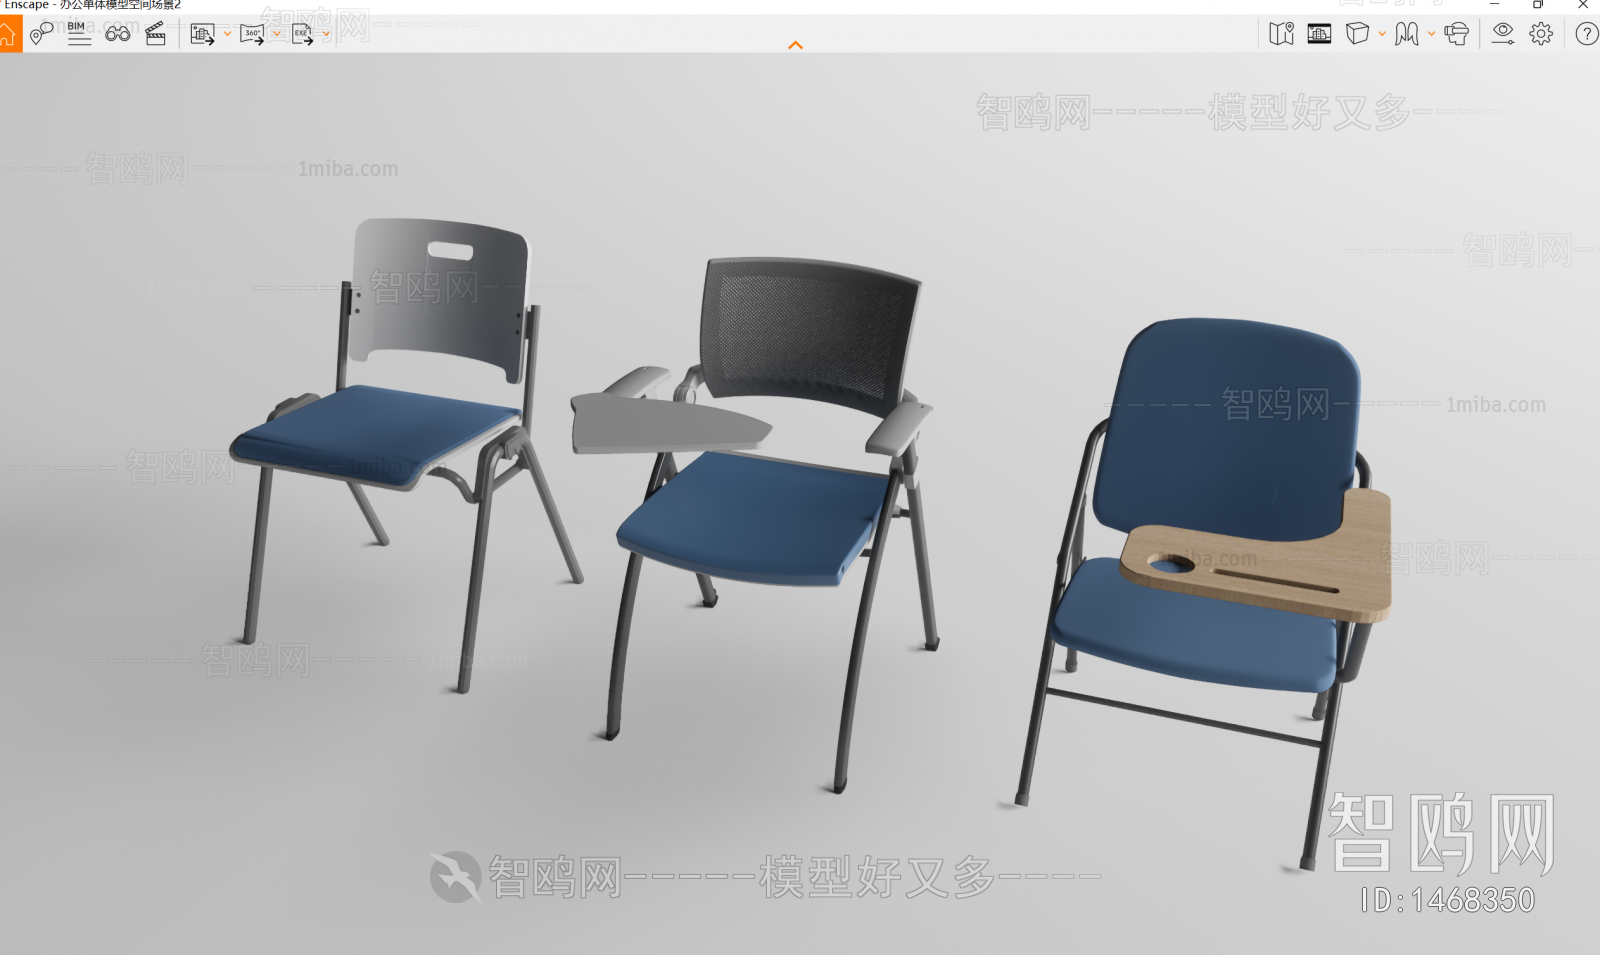 Modern Other Chairs